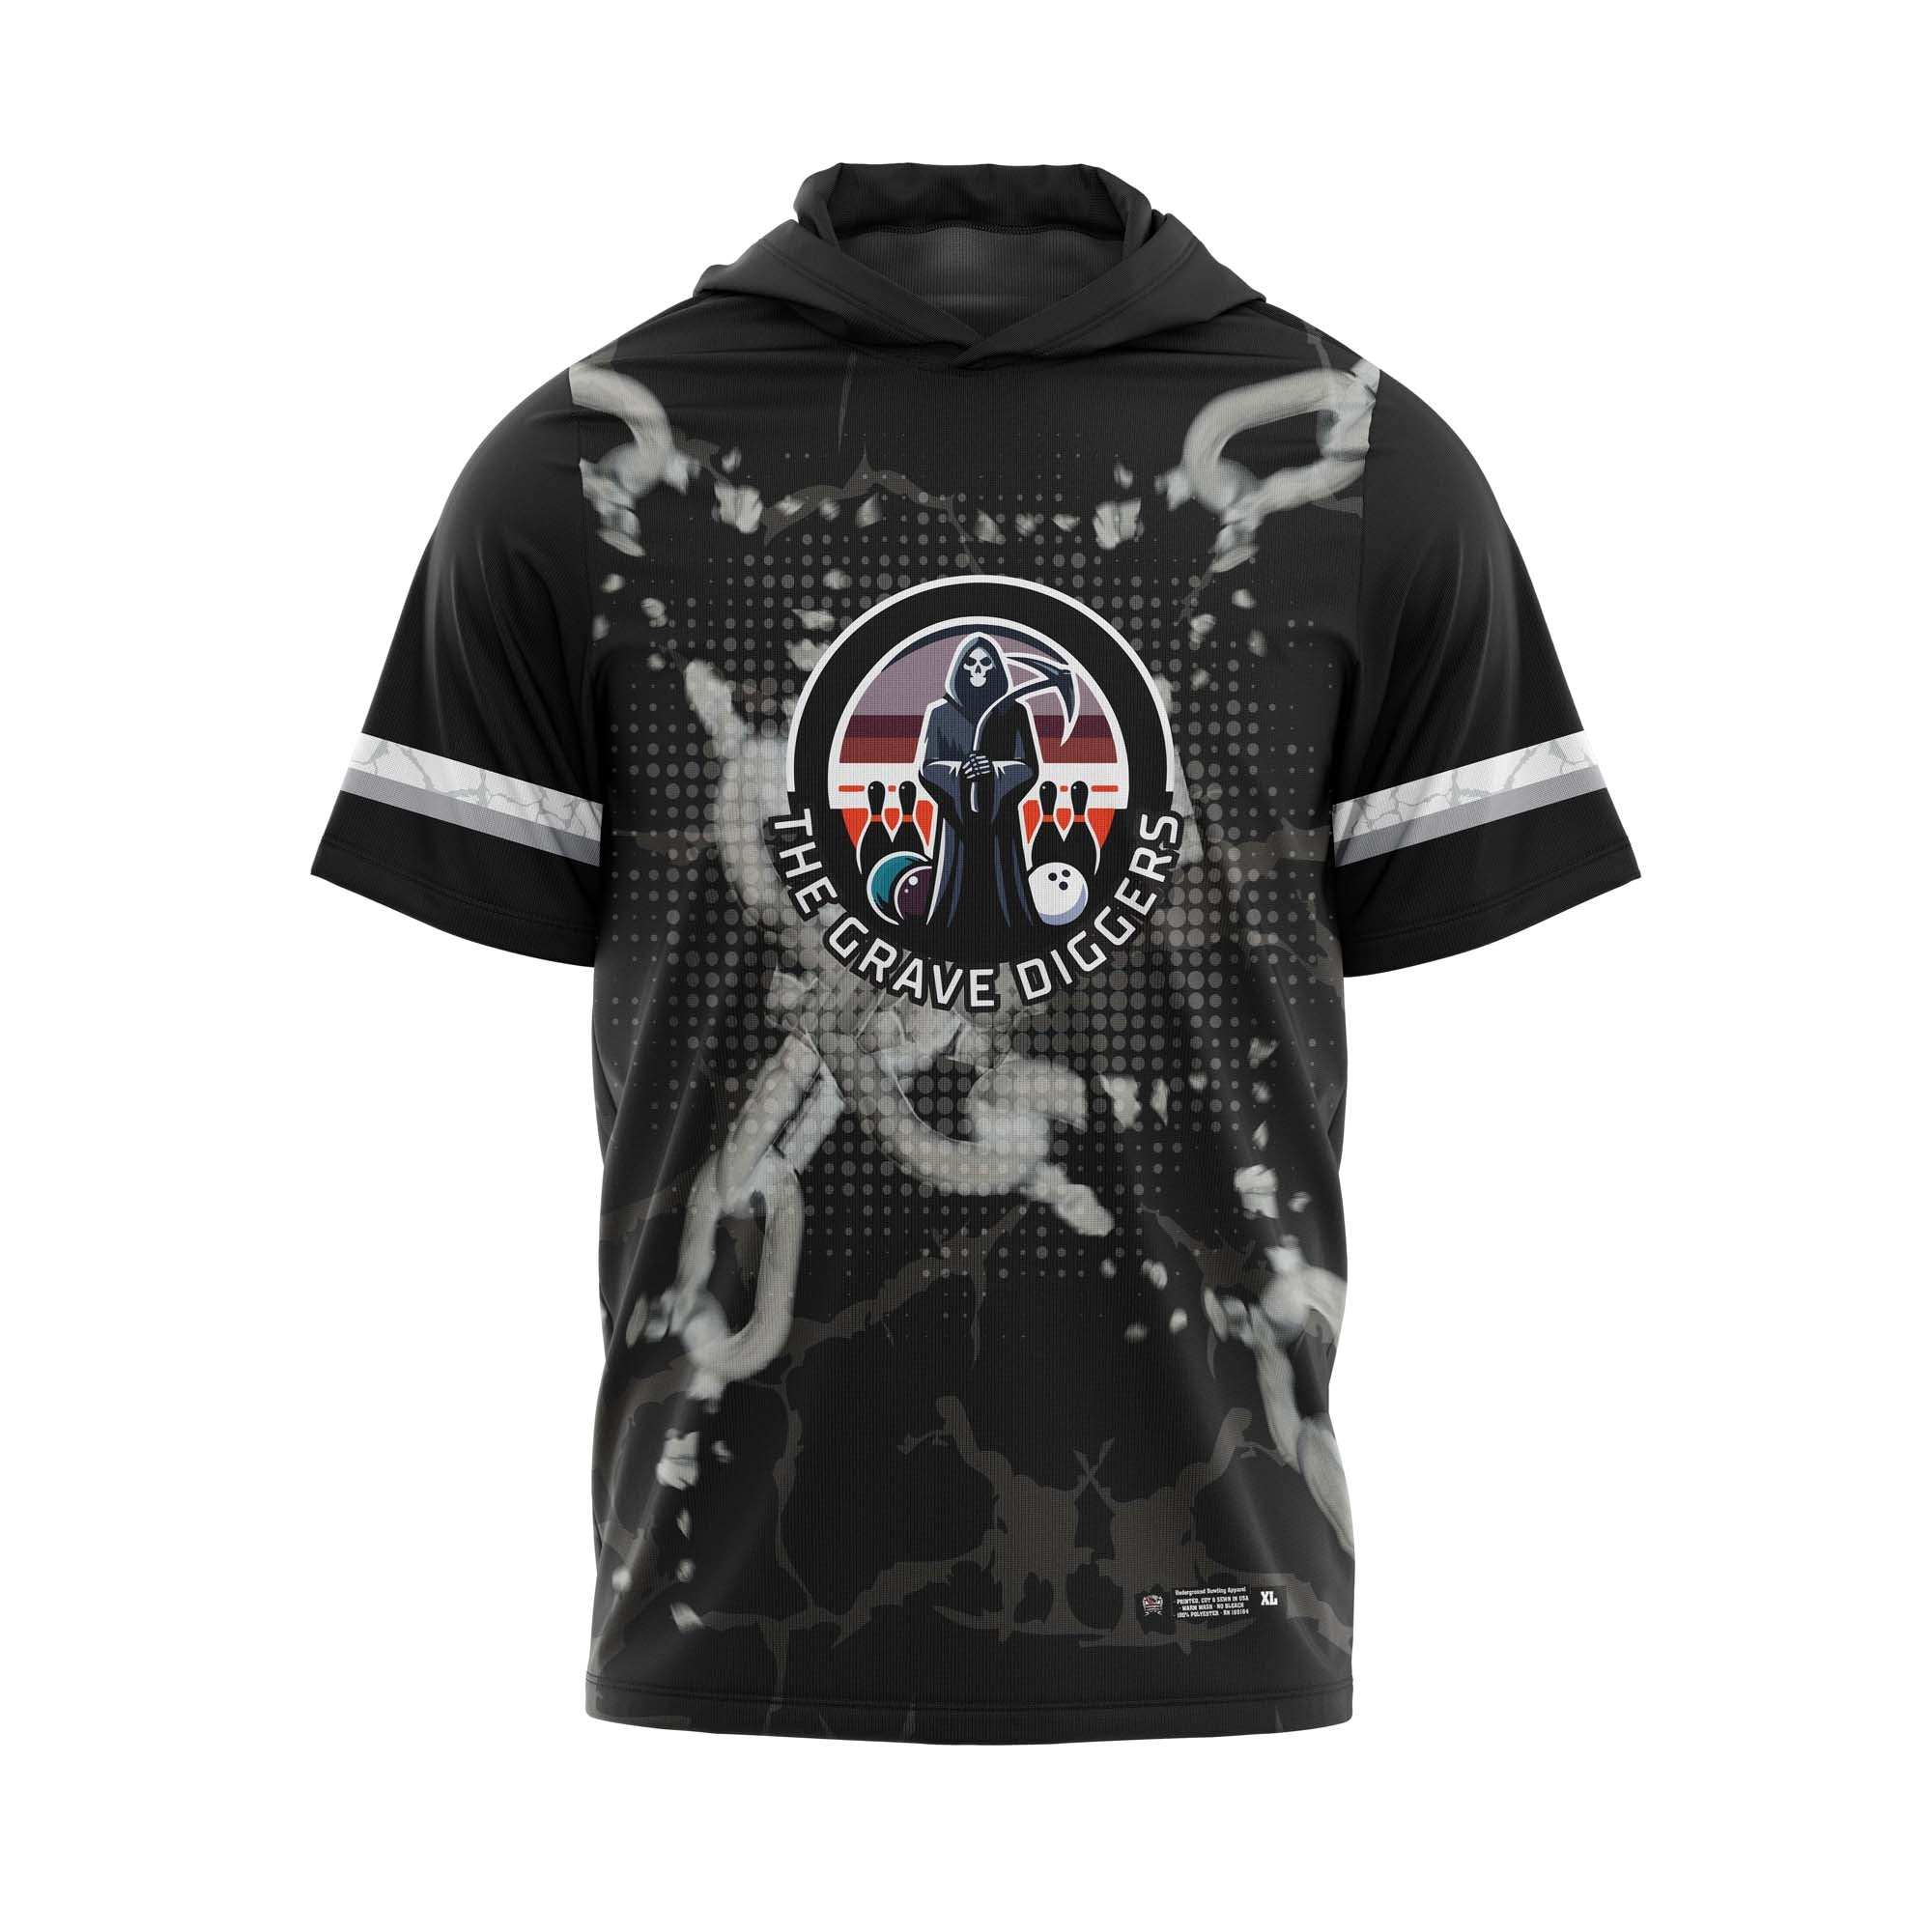 The Grave Diggers Chains Jersey